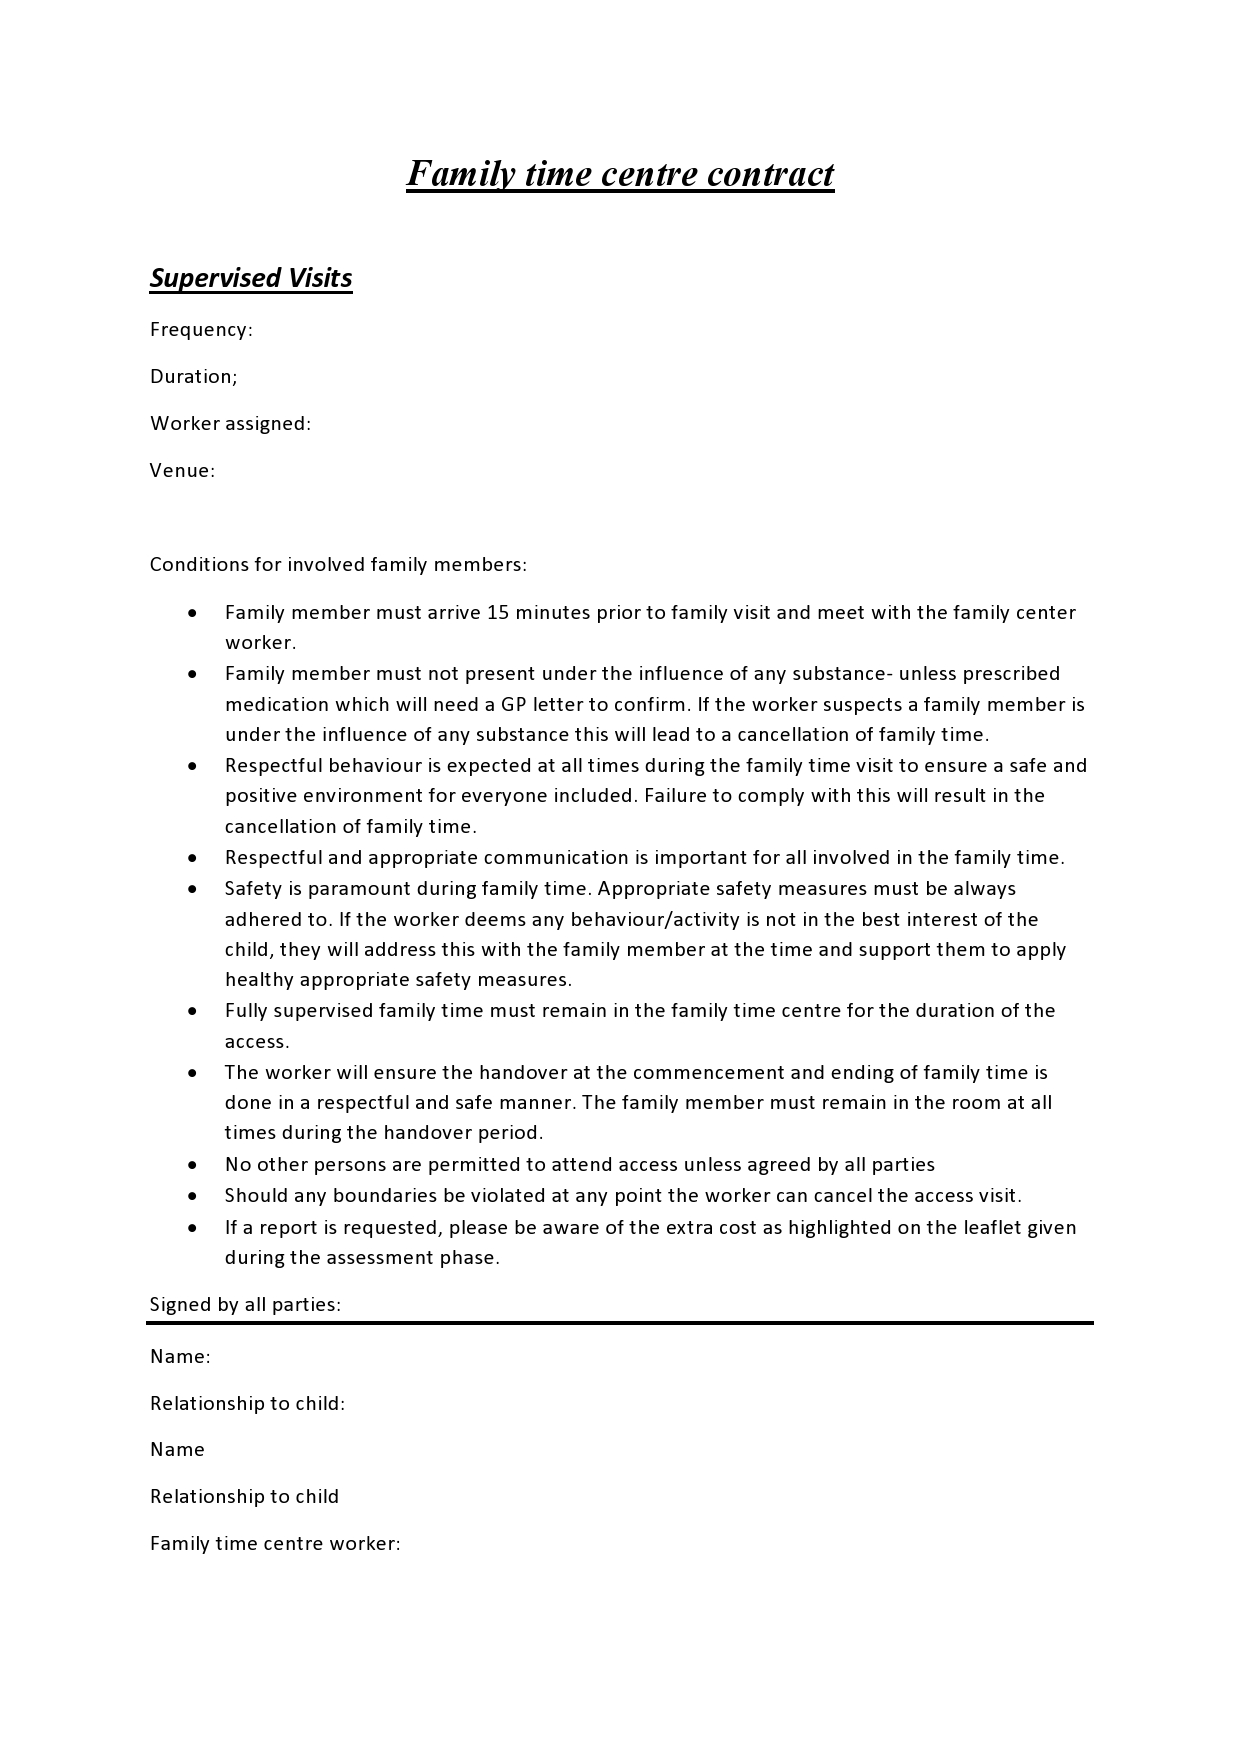 Family time centre contract page0001